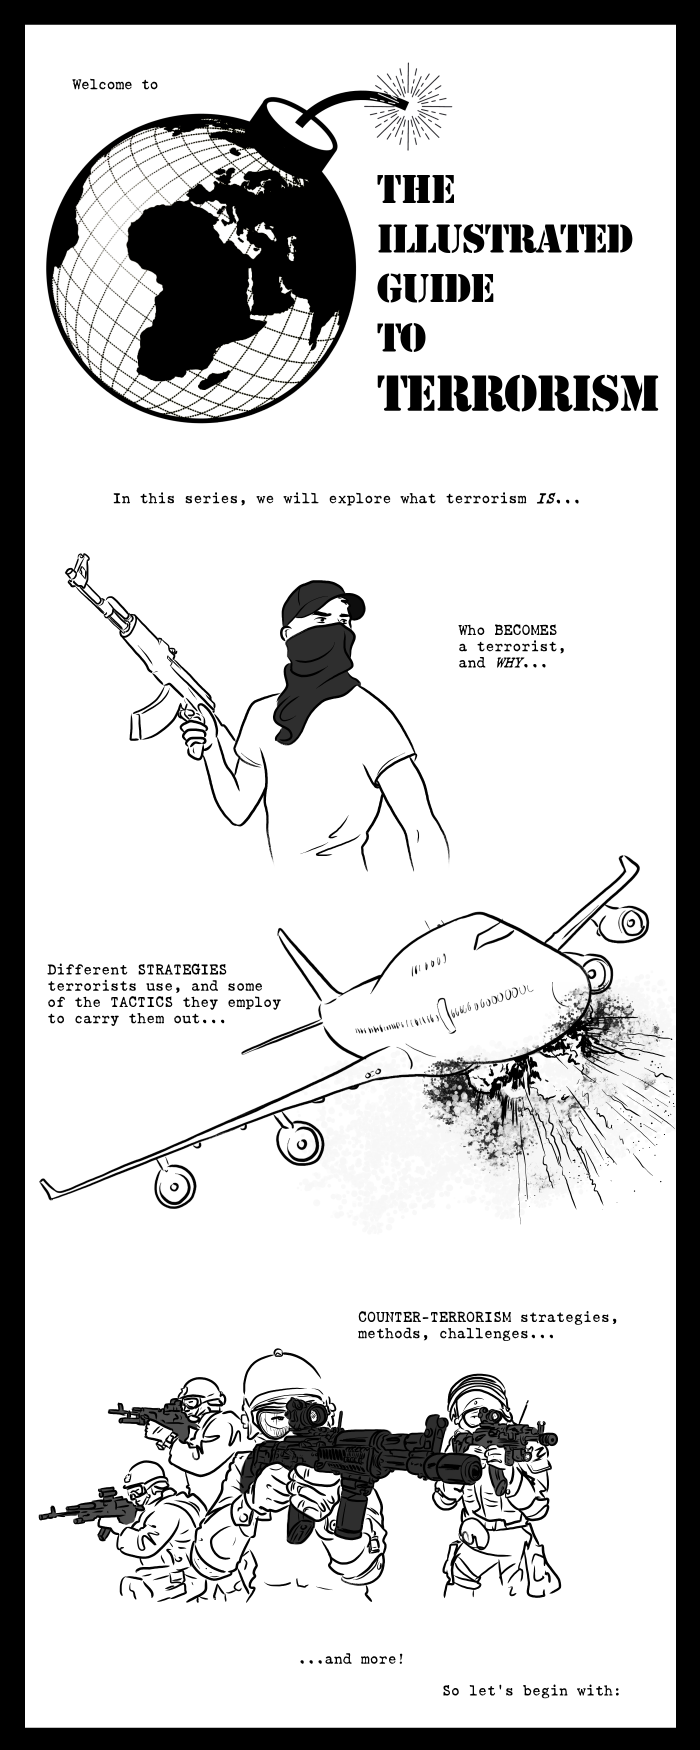 The Illustrated Guide to Terrorism